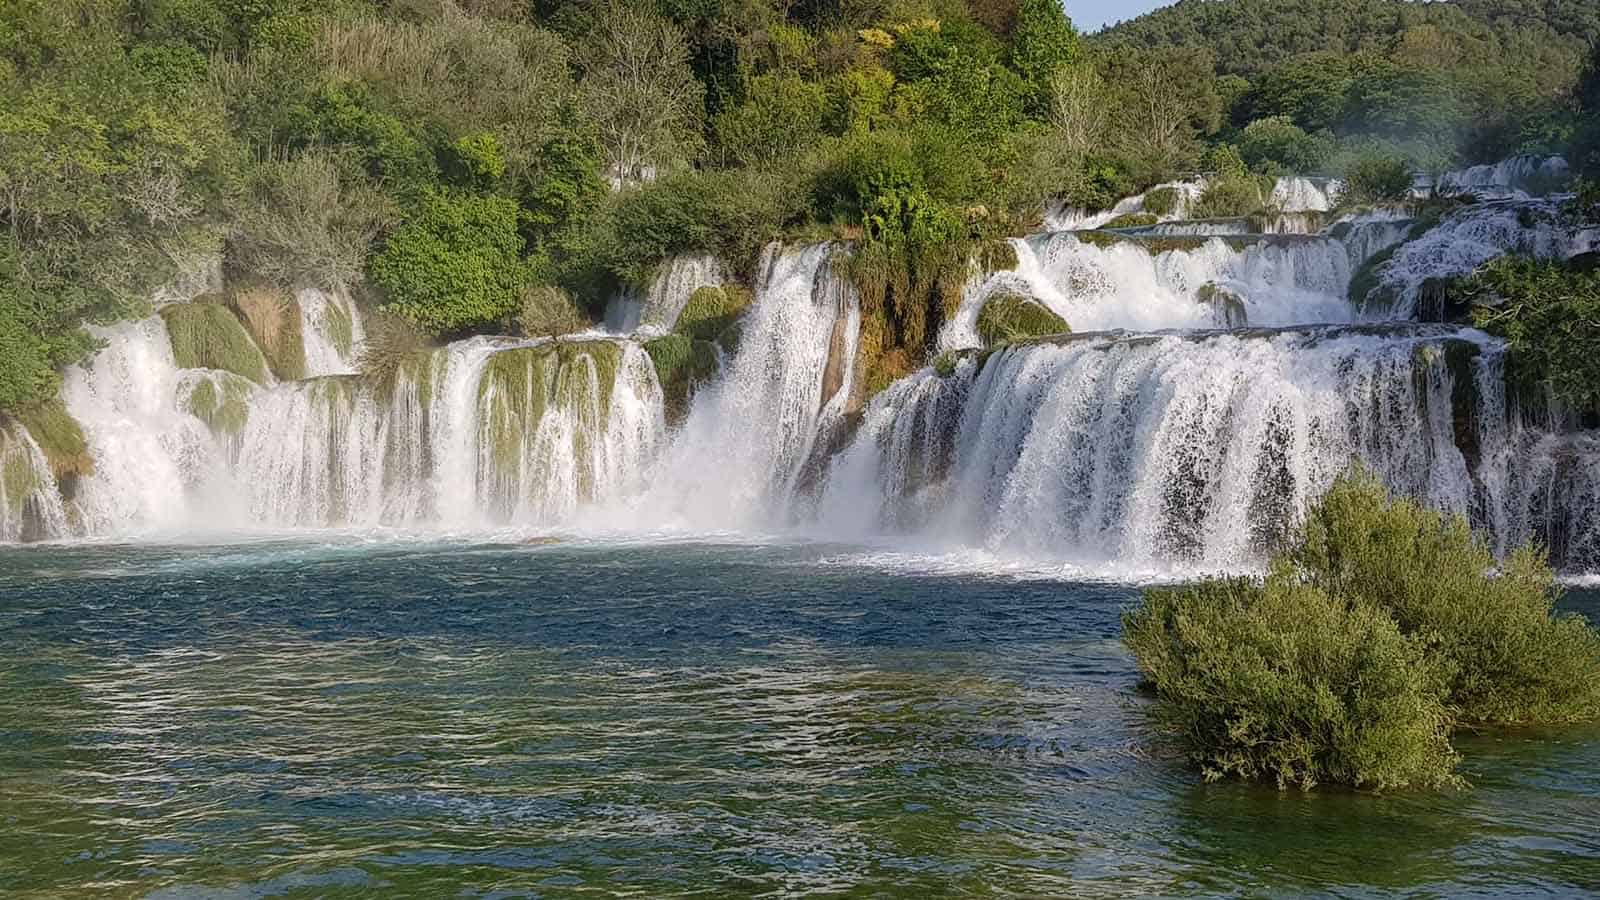 Beautiful waterfalls - a place we visit on our guided tours